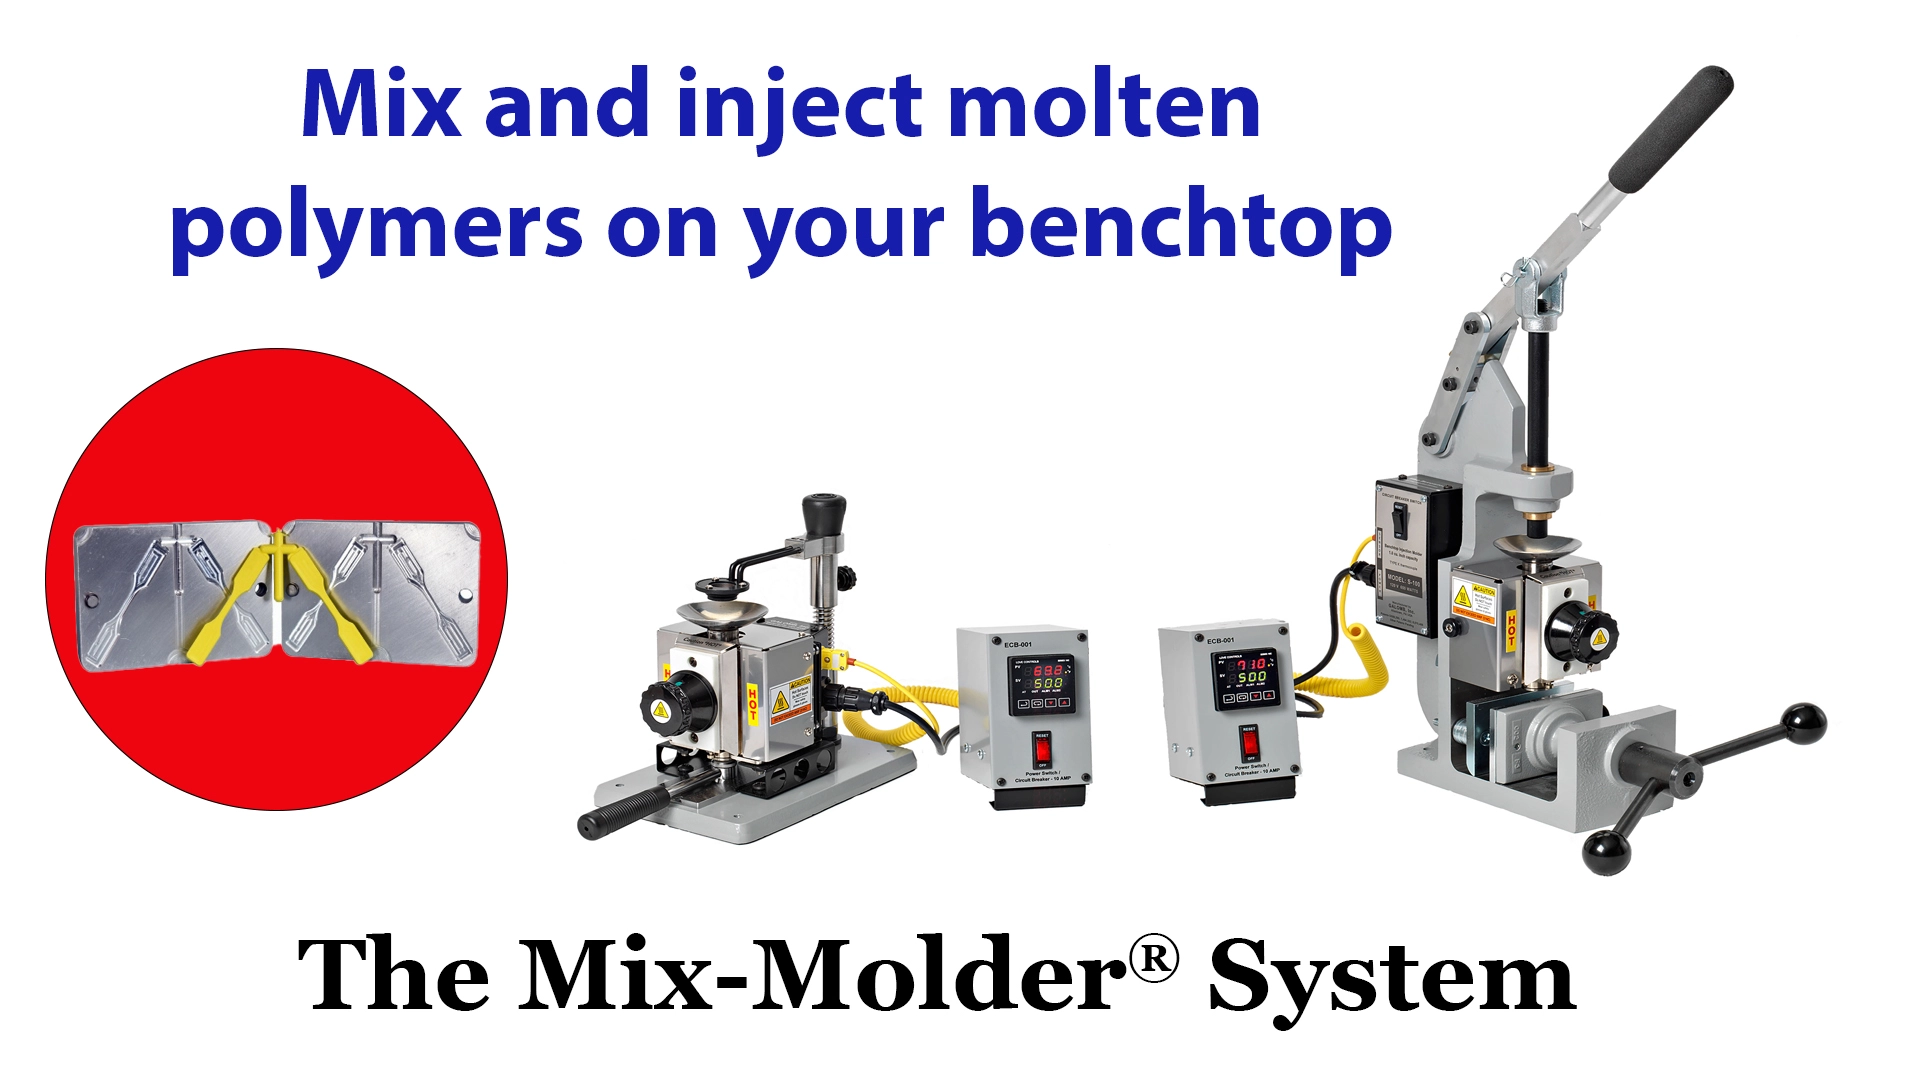 Quick overview of Mix-Molder™ System